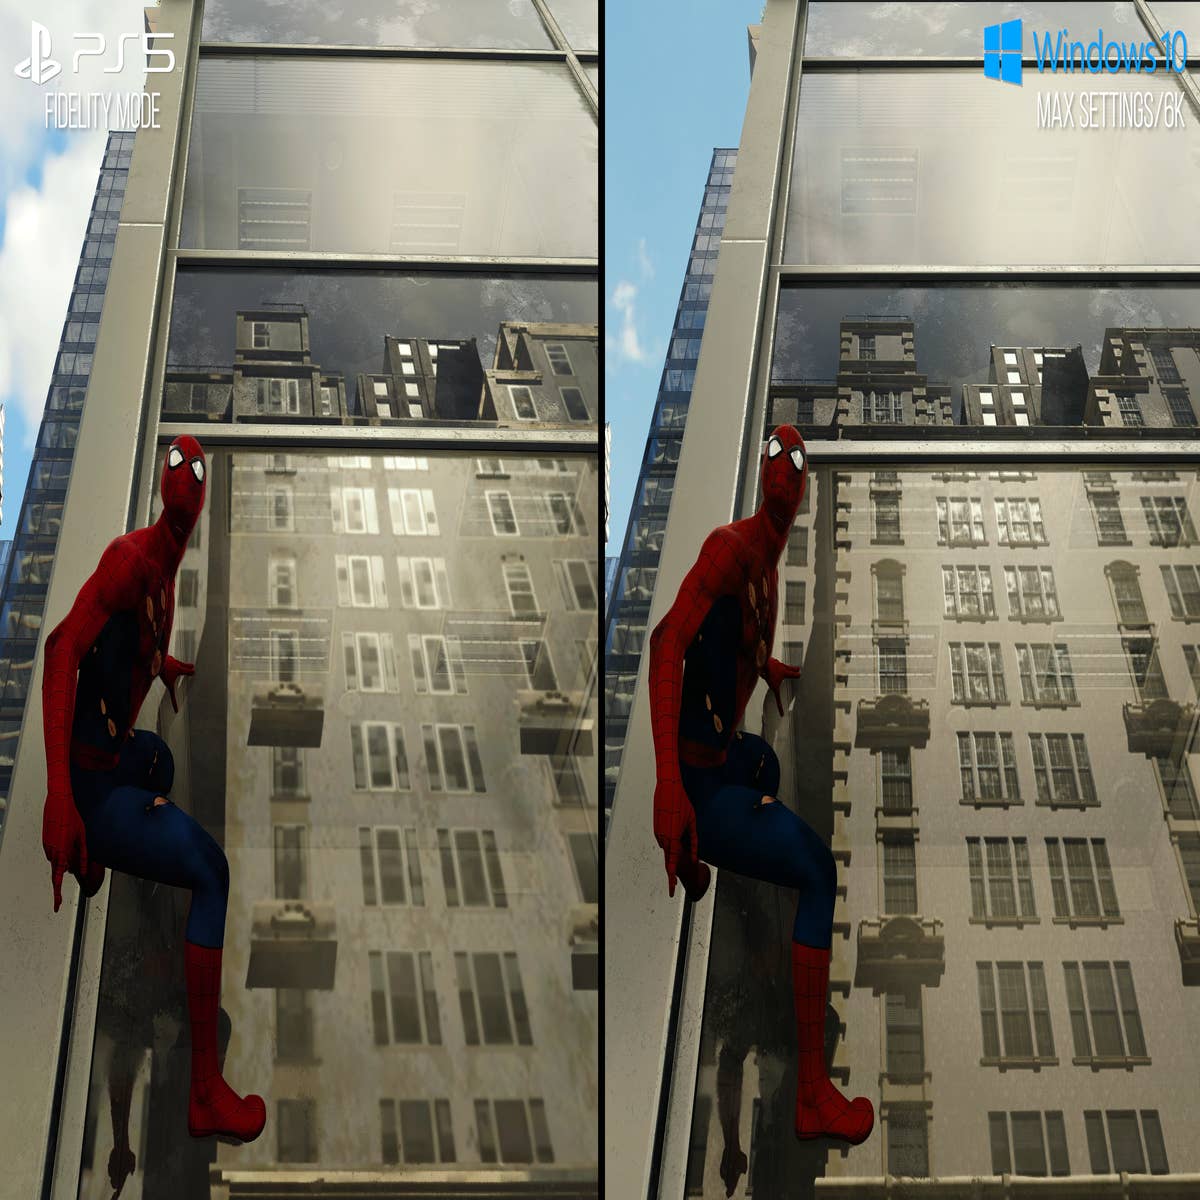 Spider Man Remastered PC tech review - Geeky Gadgets